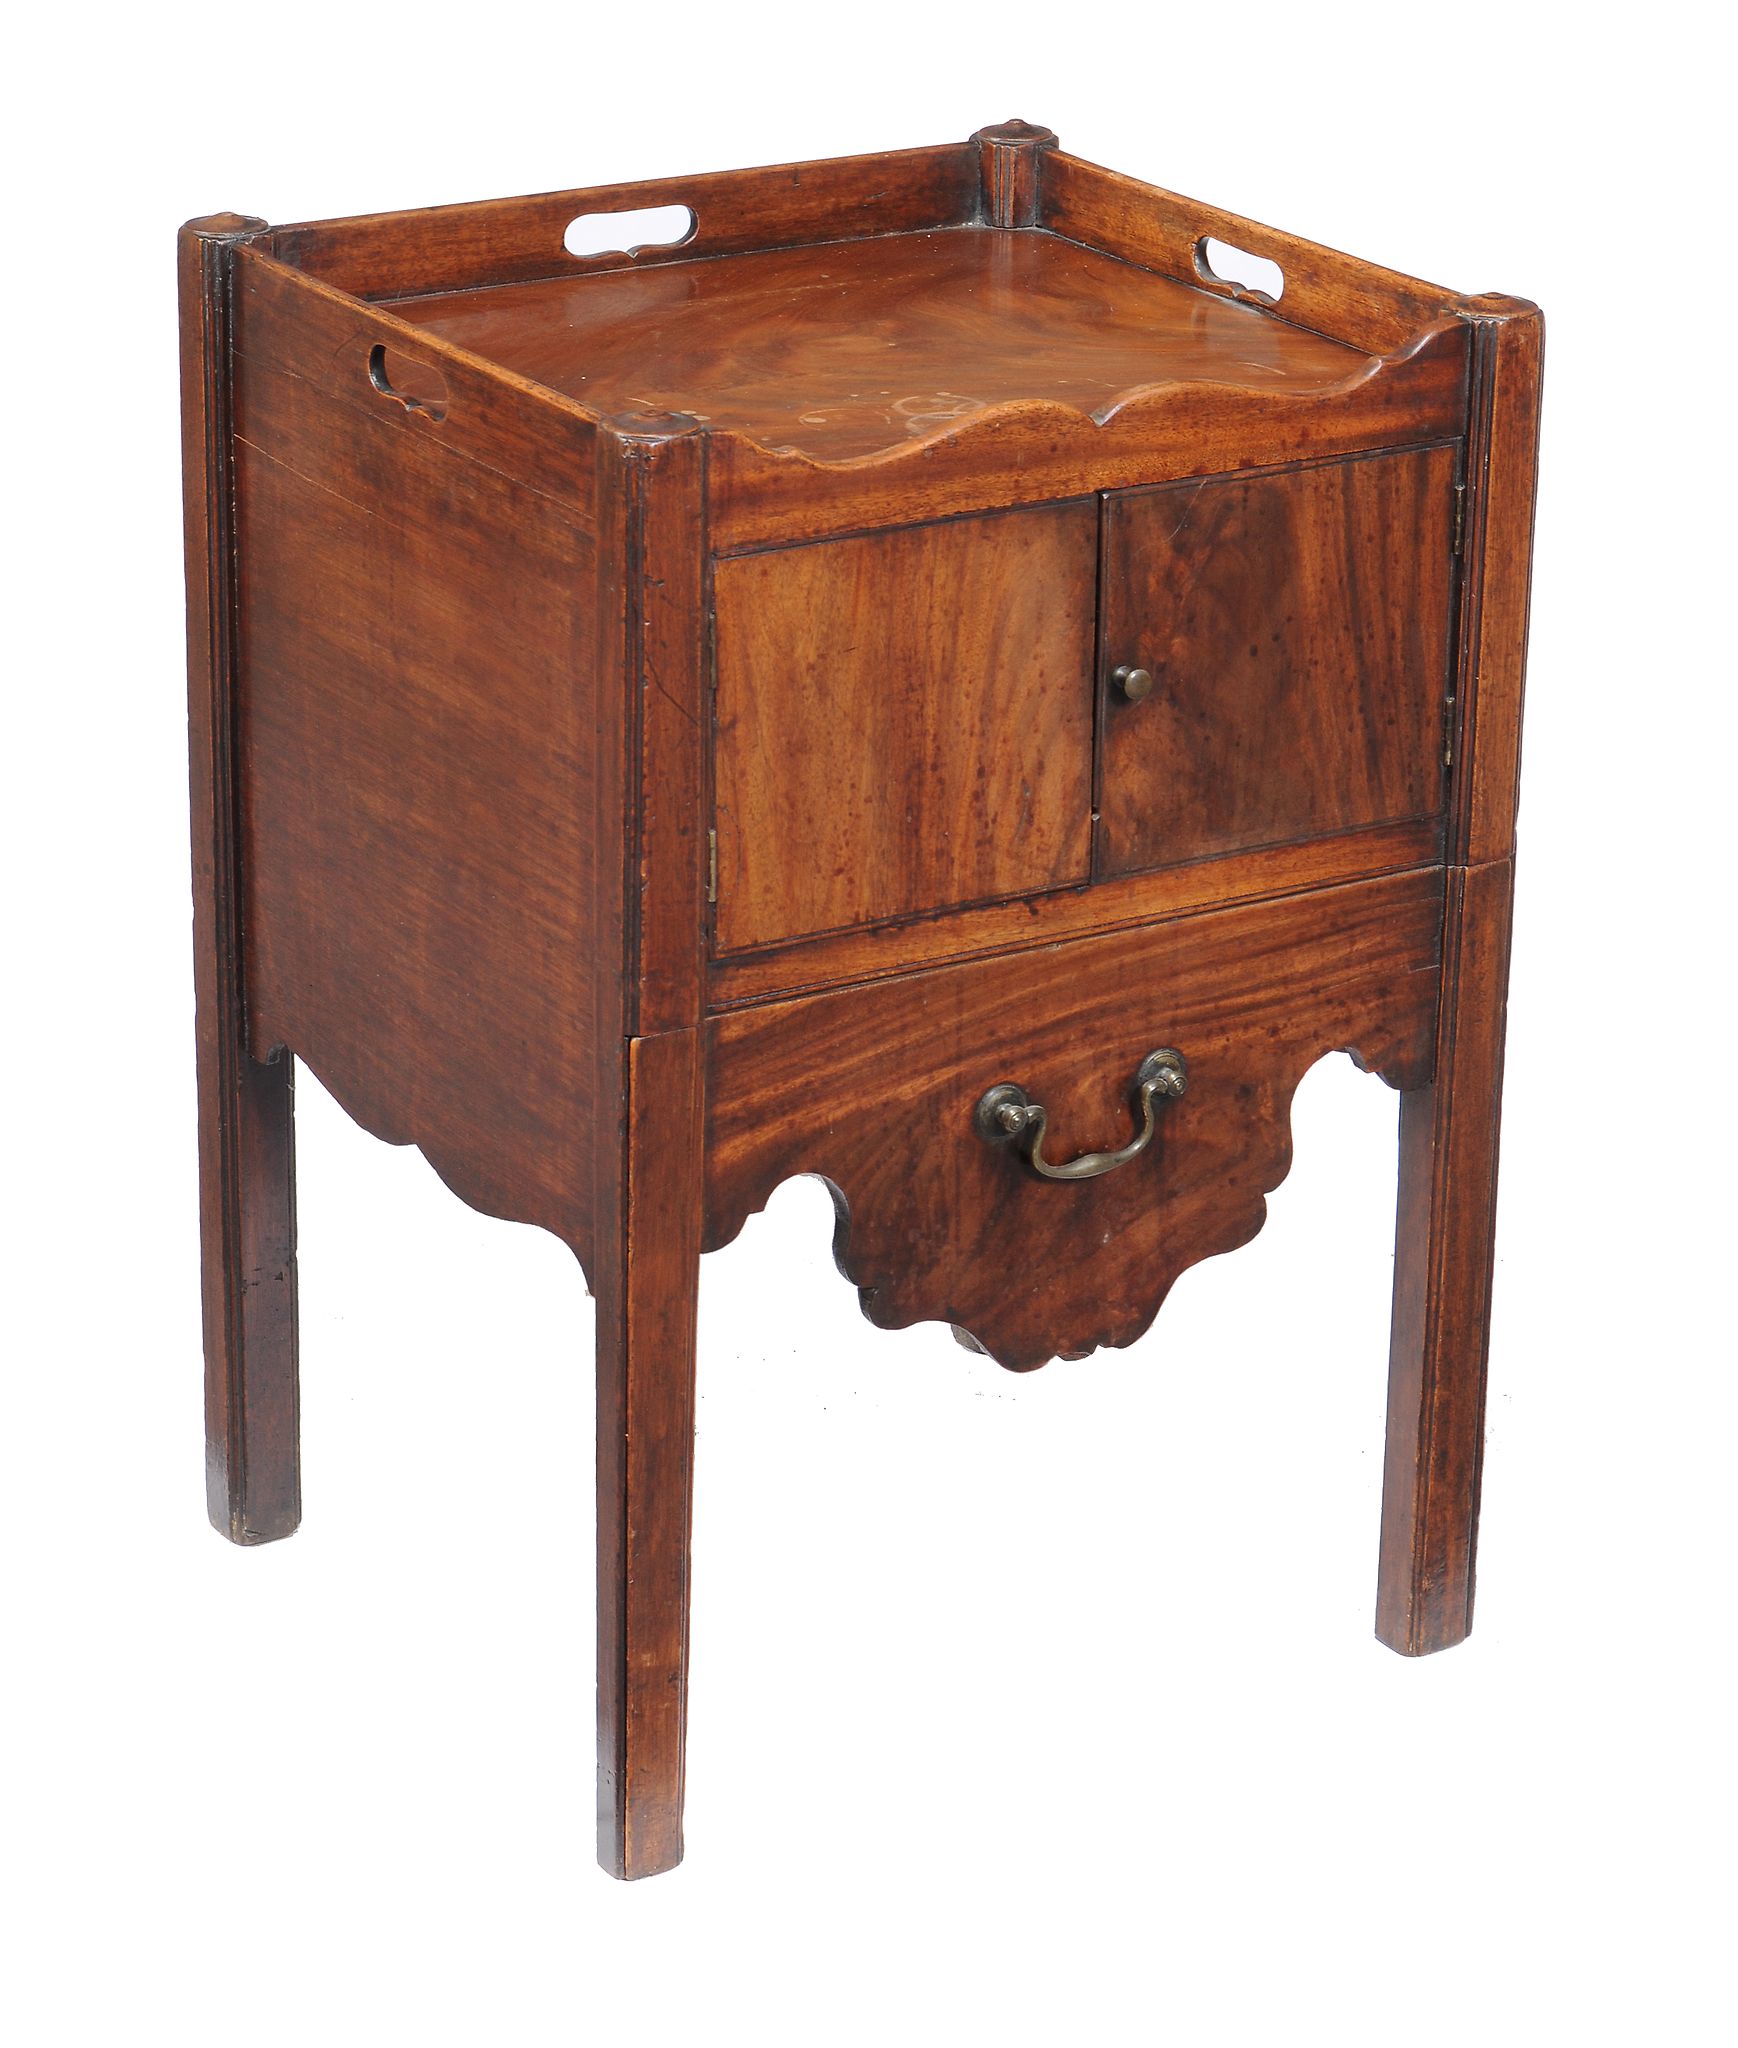 Two similar George III mahogany bedside commodes , circa 1780, each with tray top above cupboard